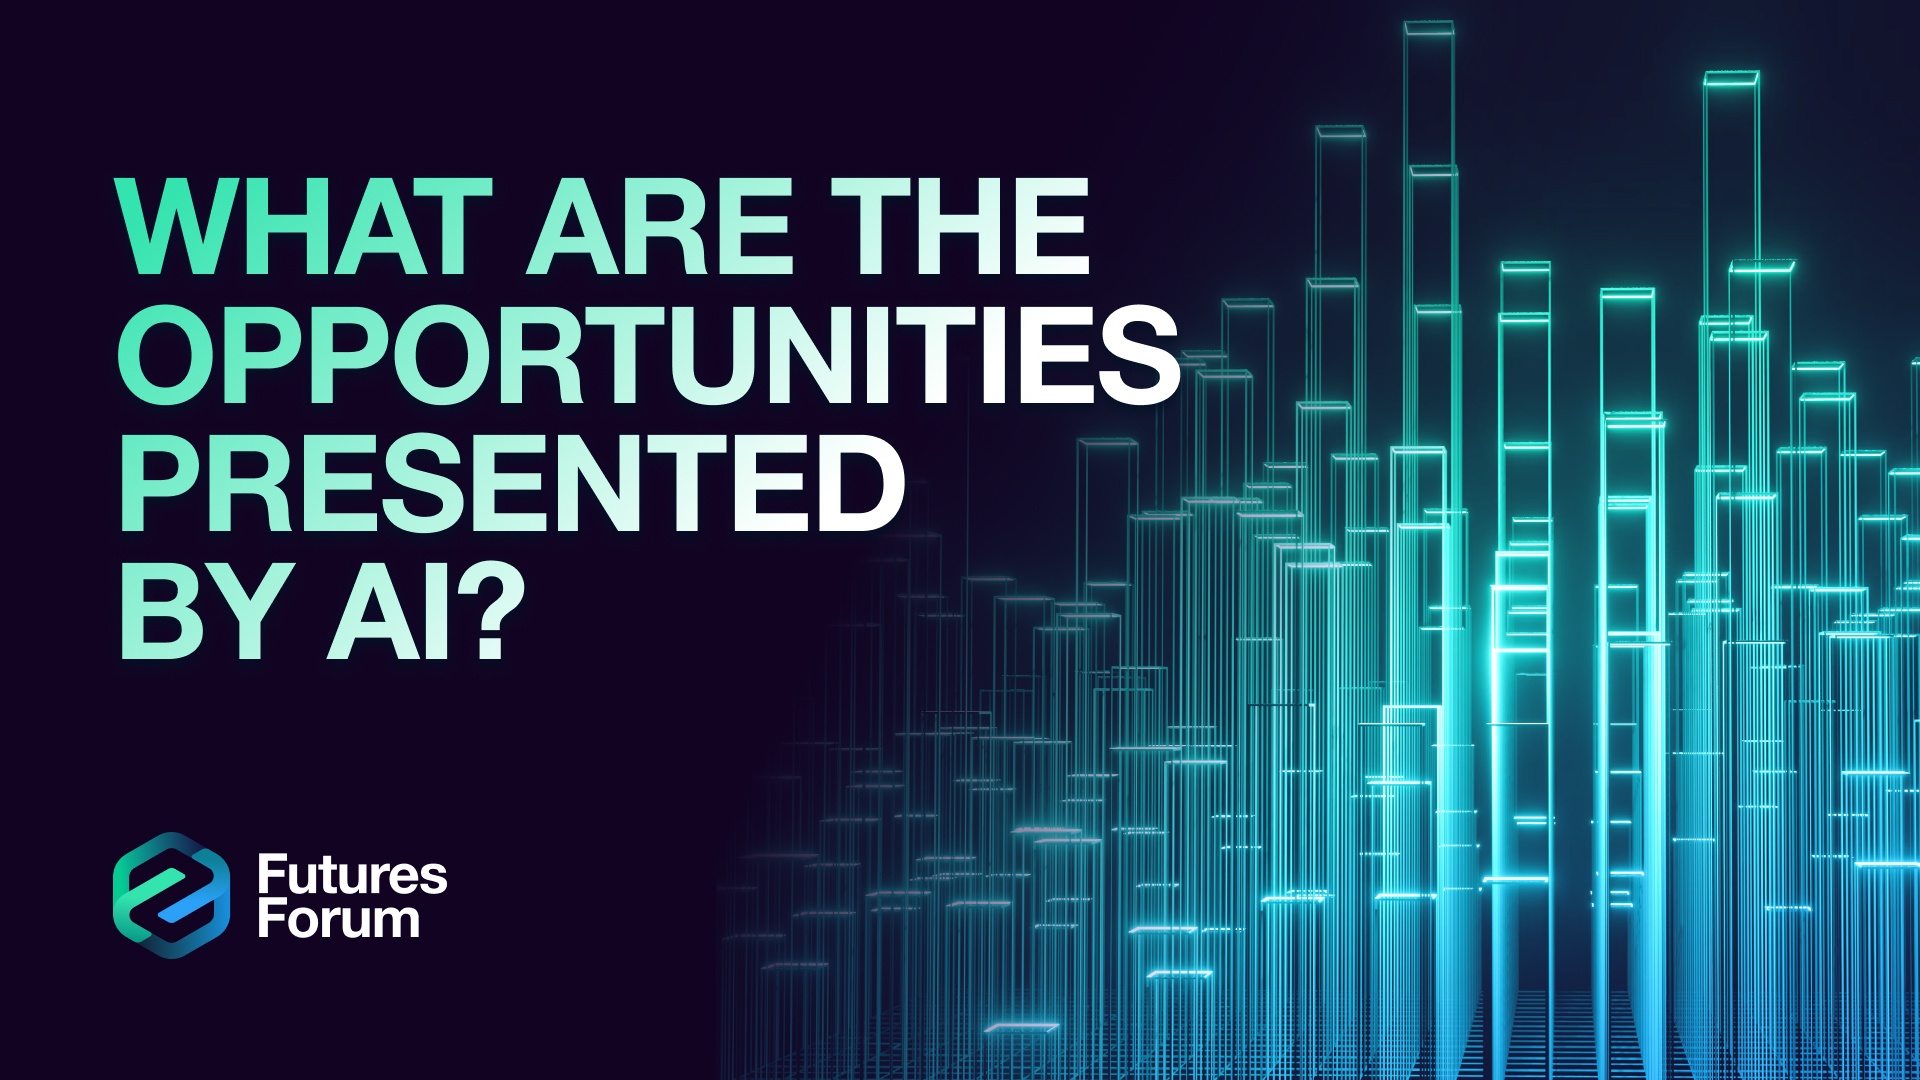 What Are the Opportunities Presented by AI?